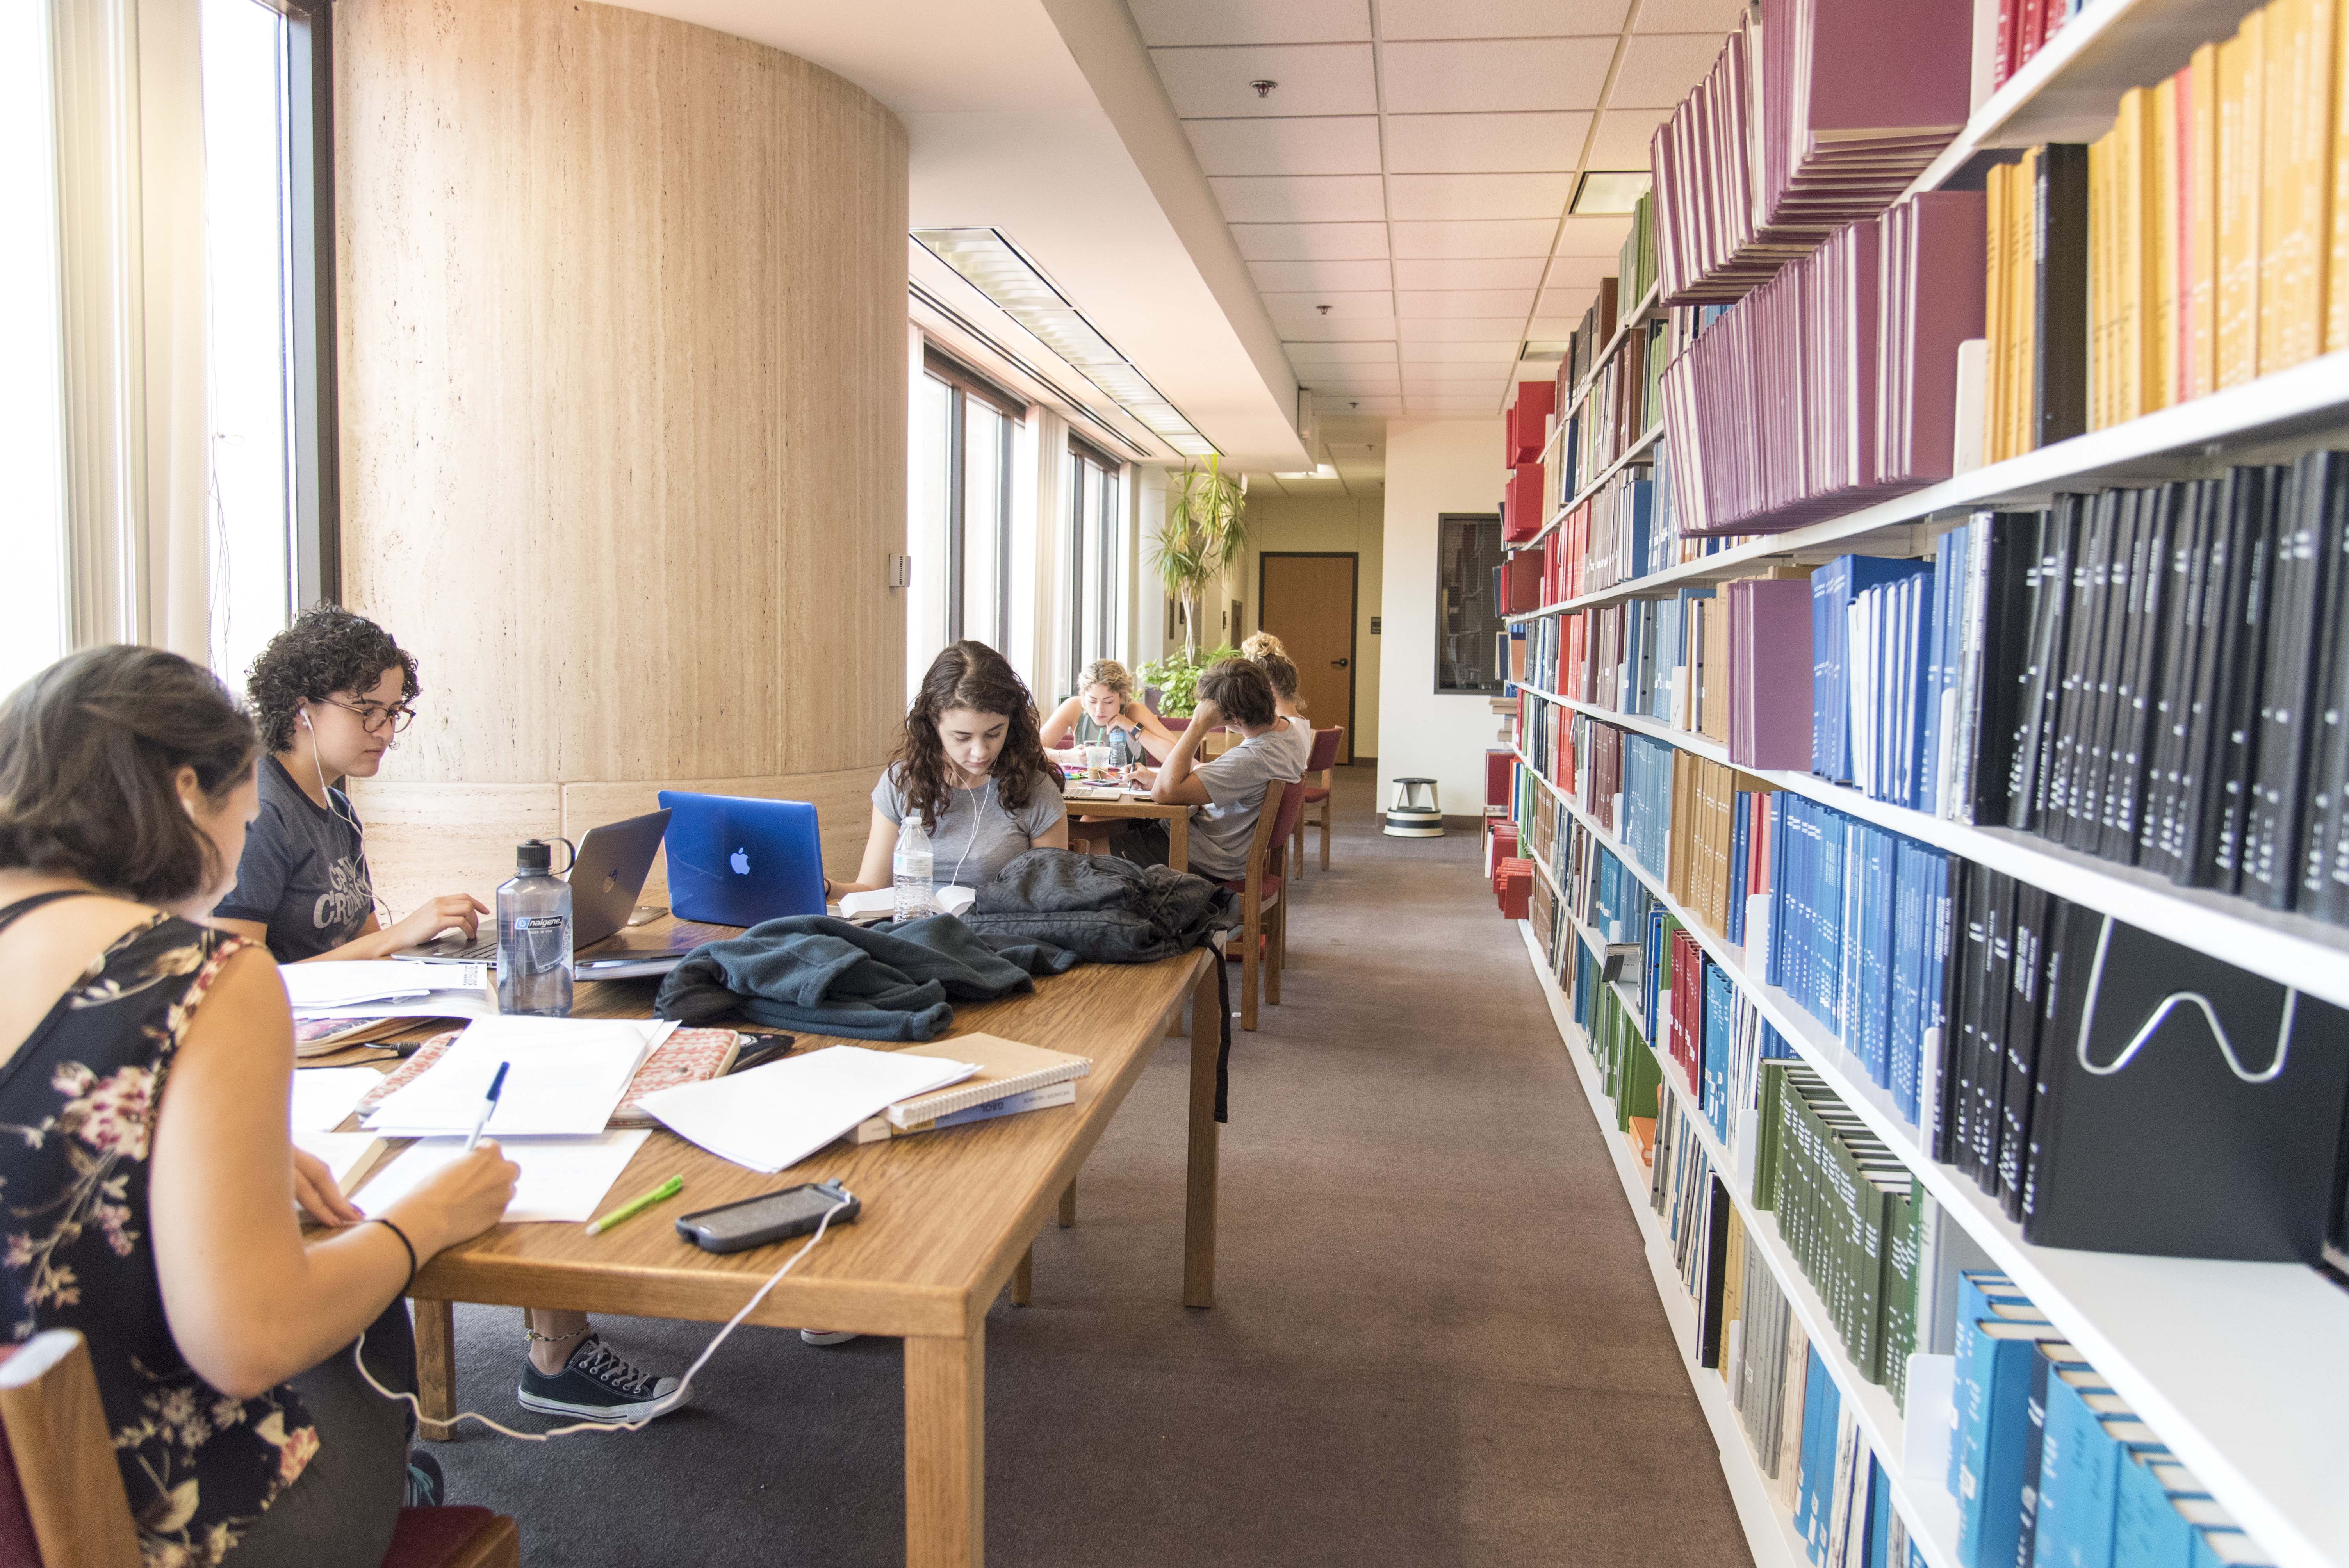 Students sitting at a desk in a library